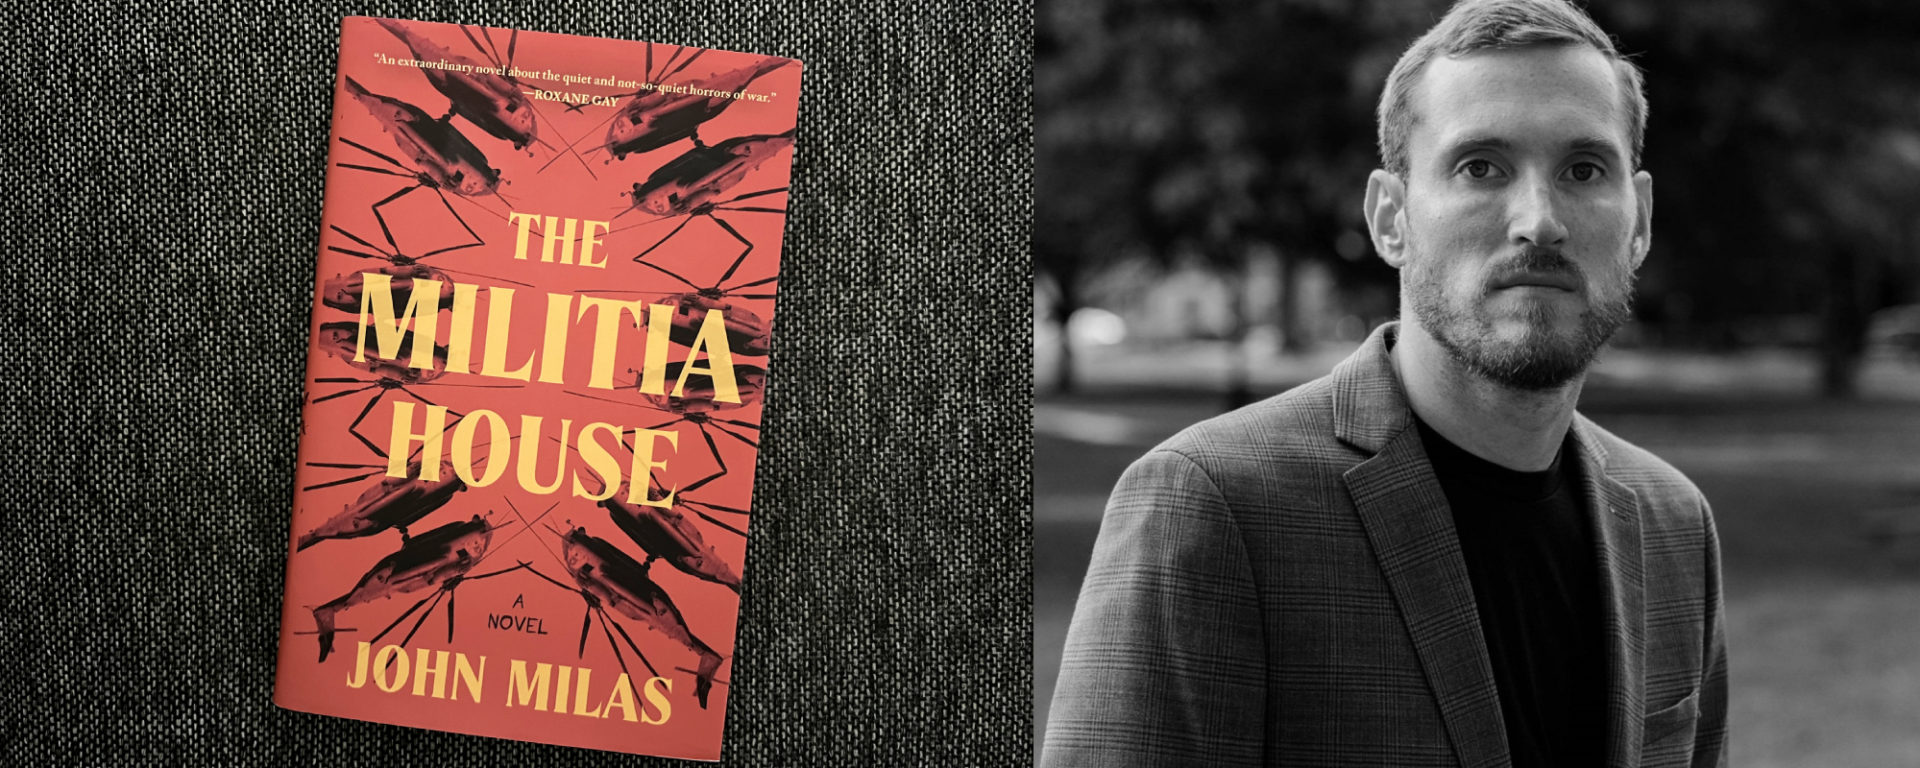 Two images side by side. On the left, the novel The Militia House has a red cover with yellow lettering. On the right a black and white photo of author John Milas, a white man wearing a blazer and black shirt looking into the camera.